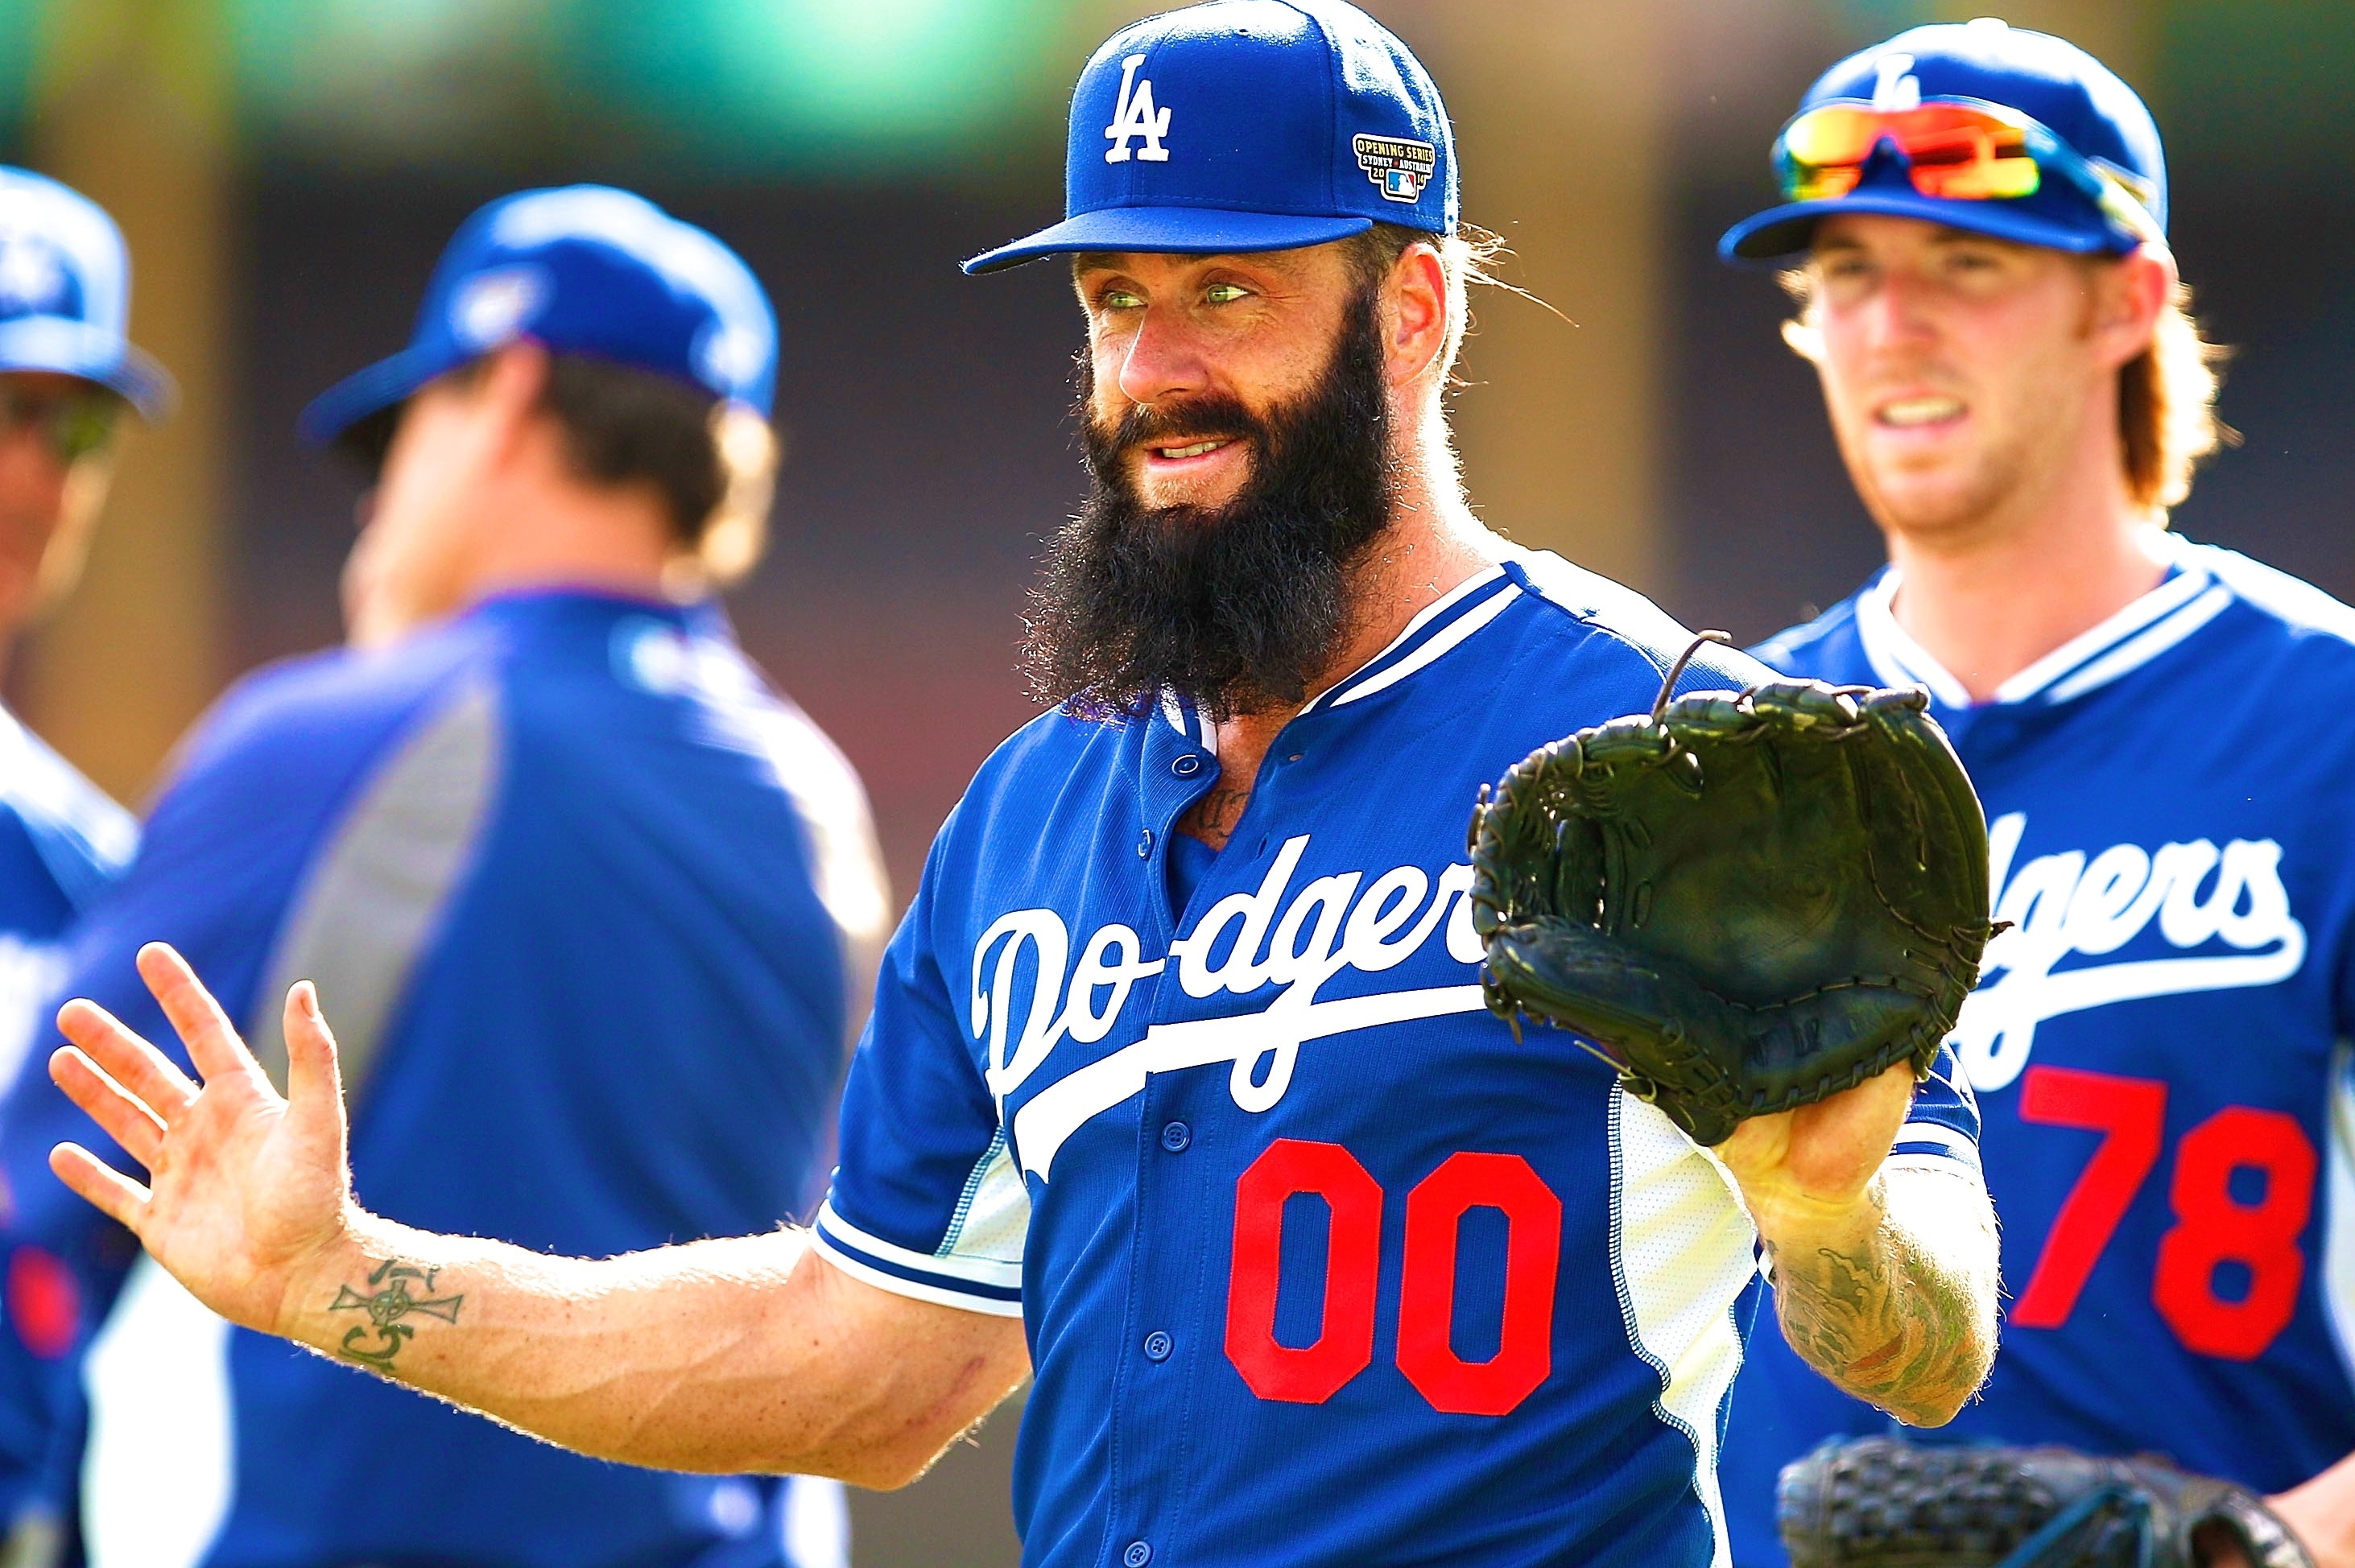 Is Brian Wilson a Good Fit for the Dodgers?